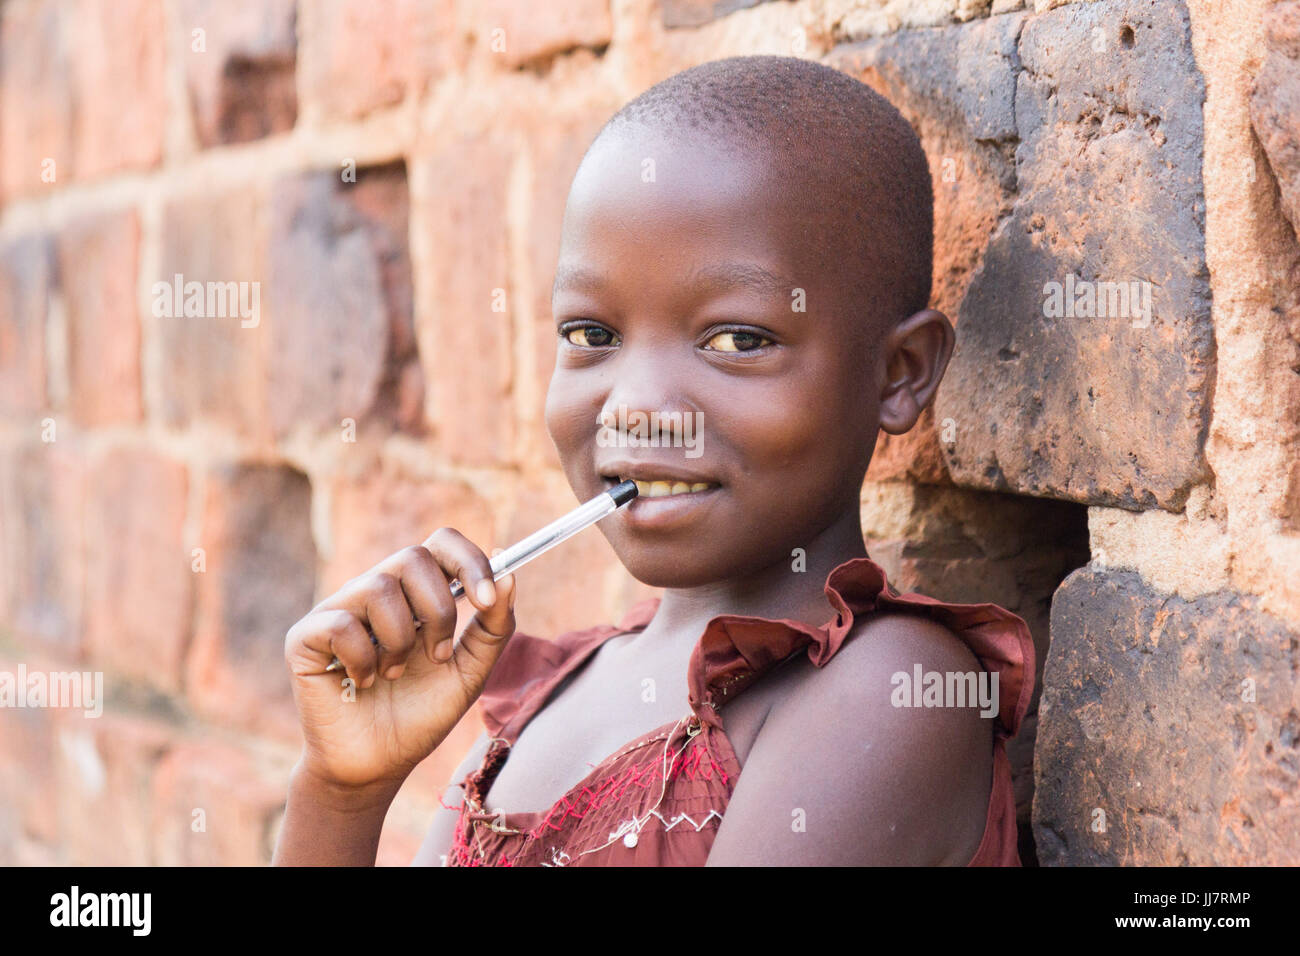 An 11-year old black Ugandan girl smiling and holding a pen against her mouth and leaning against a brick wall looking at the camera Stock Photo